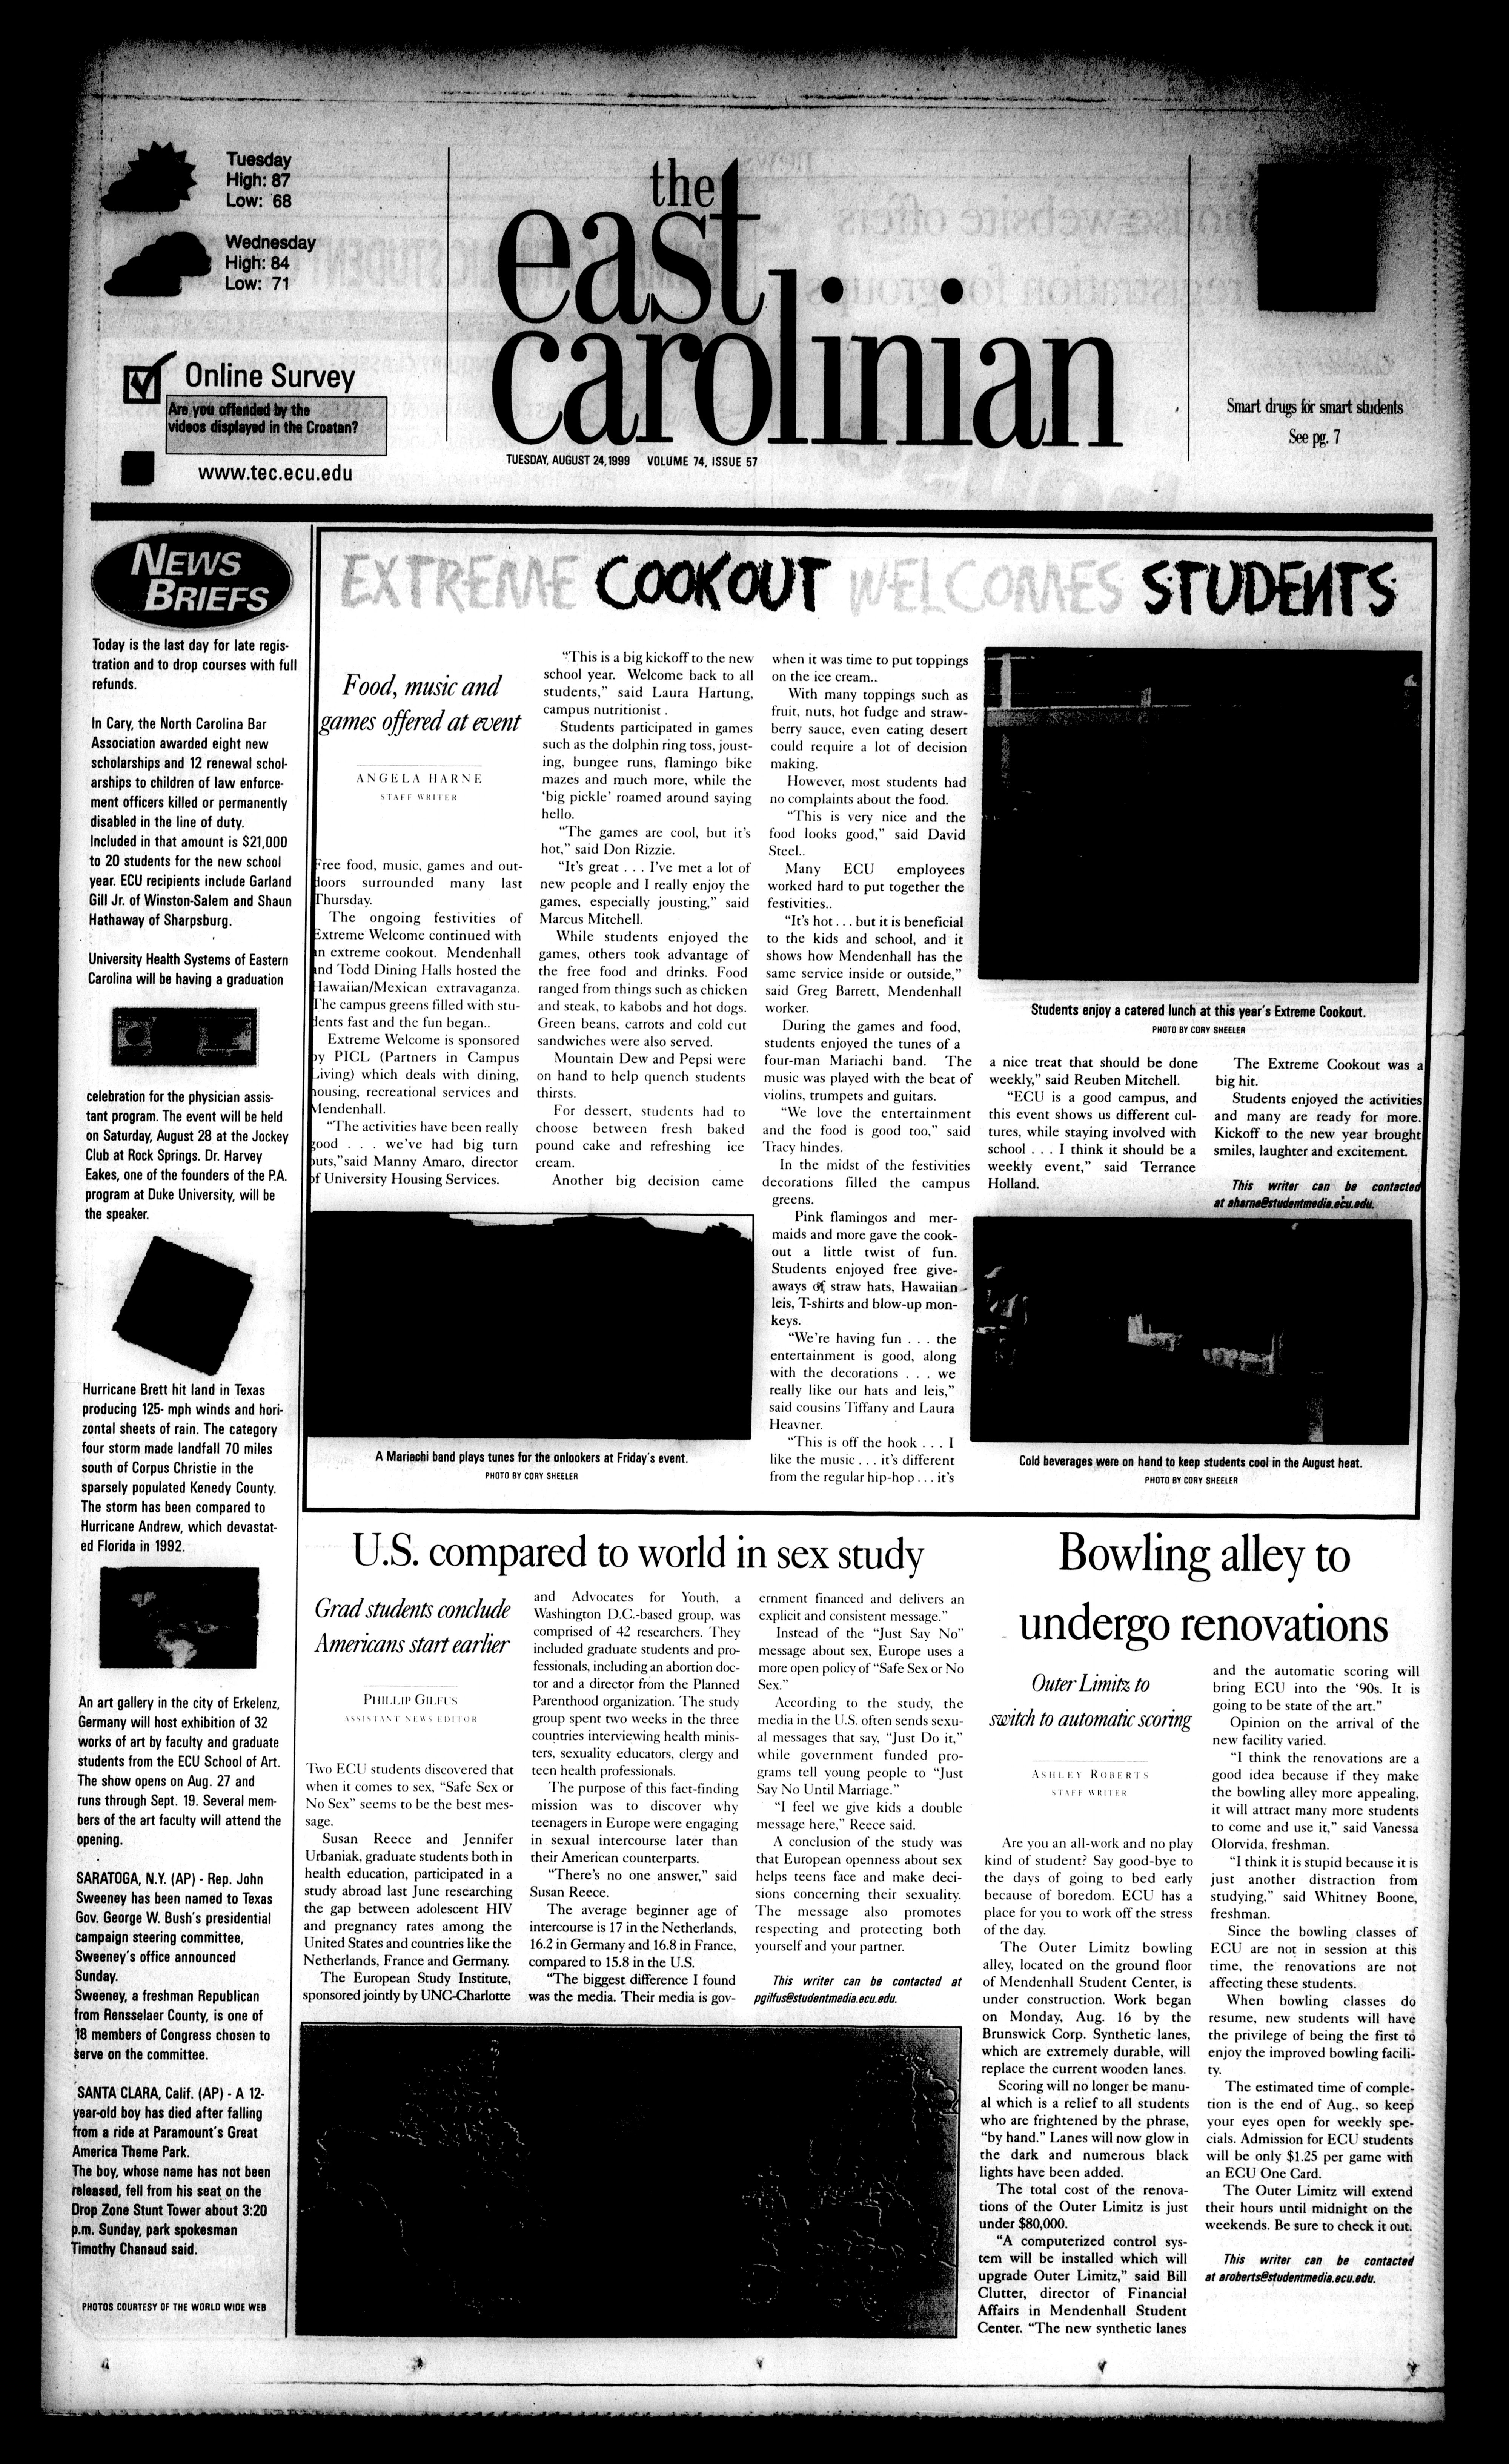 The East Carolinian, August 24, 1999 picture pic